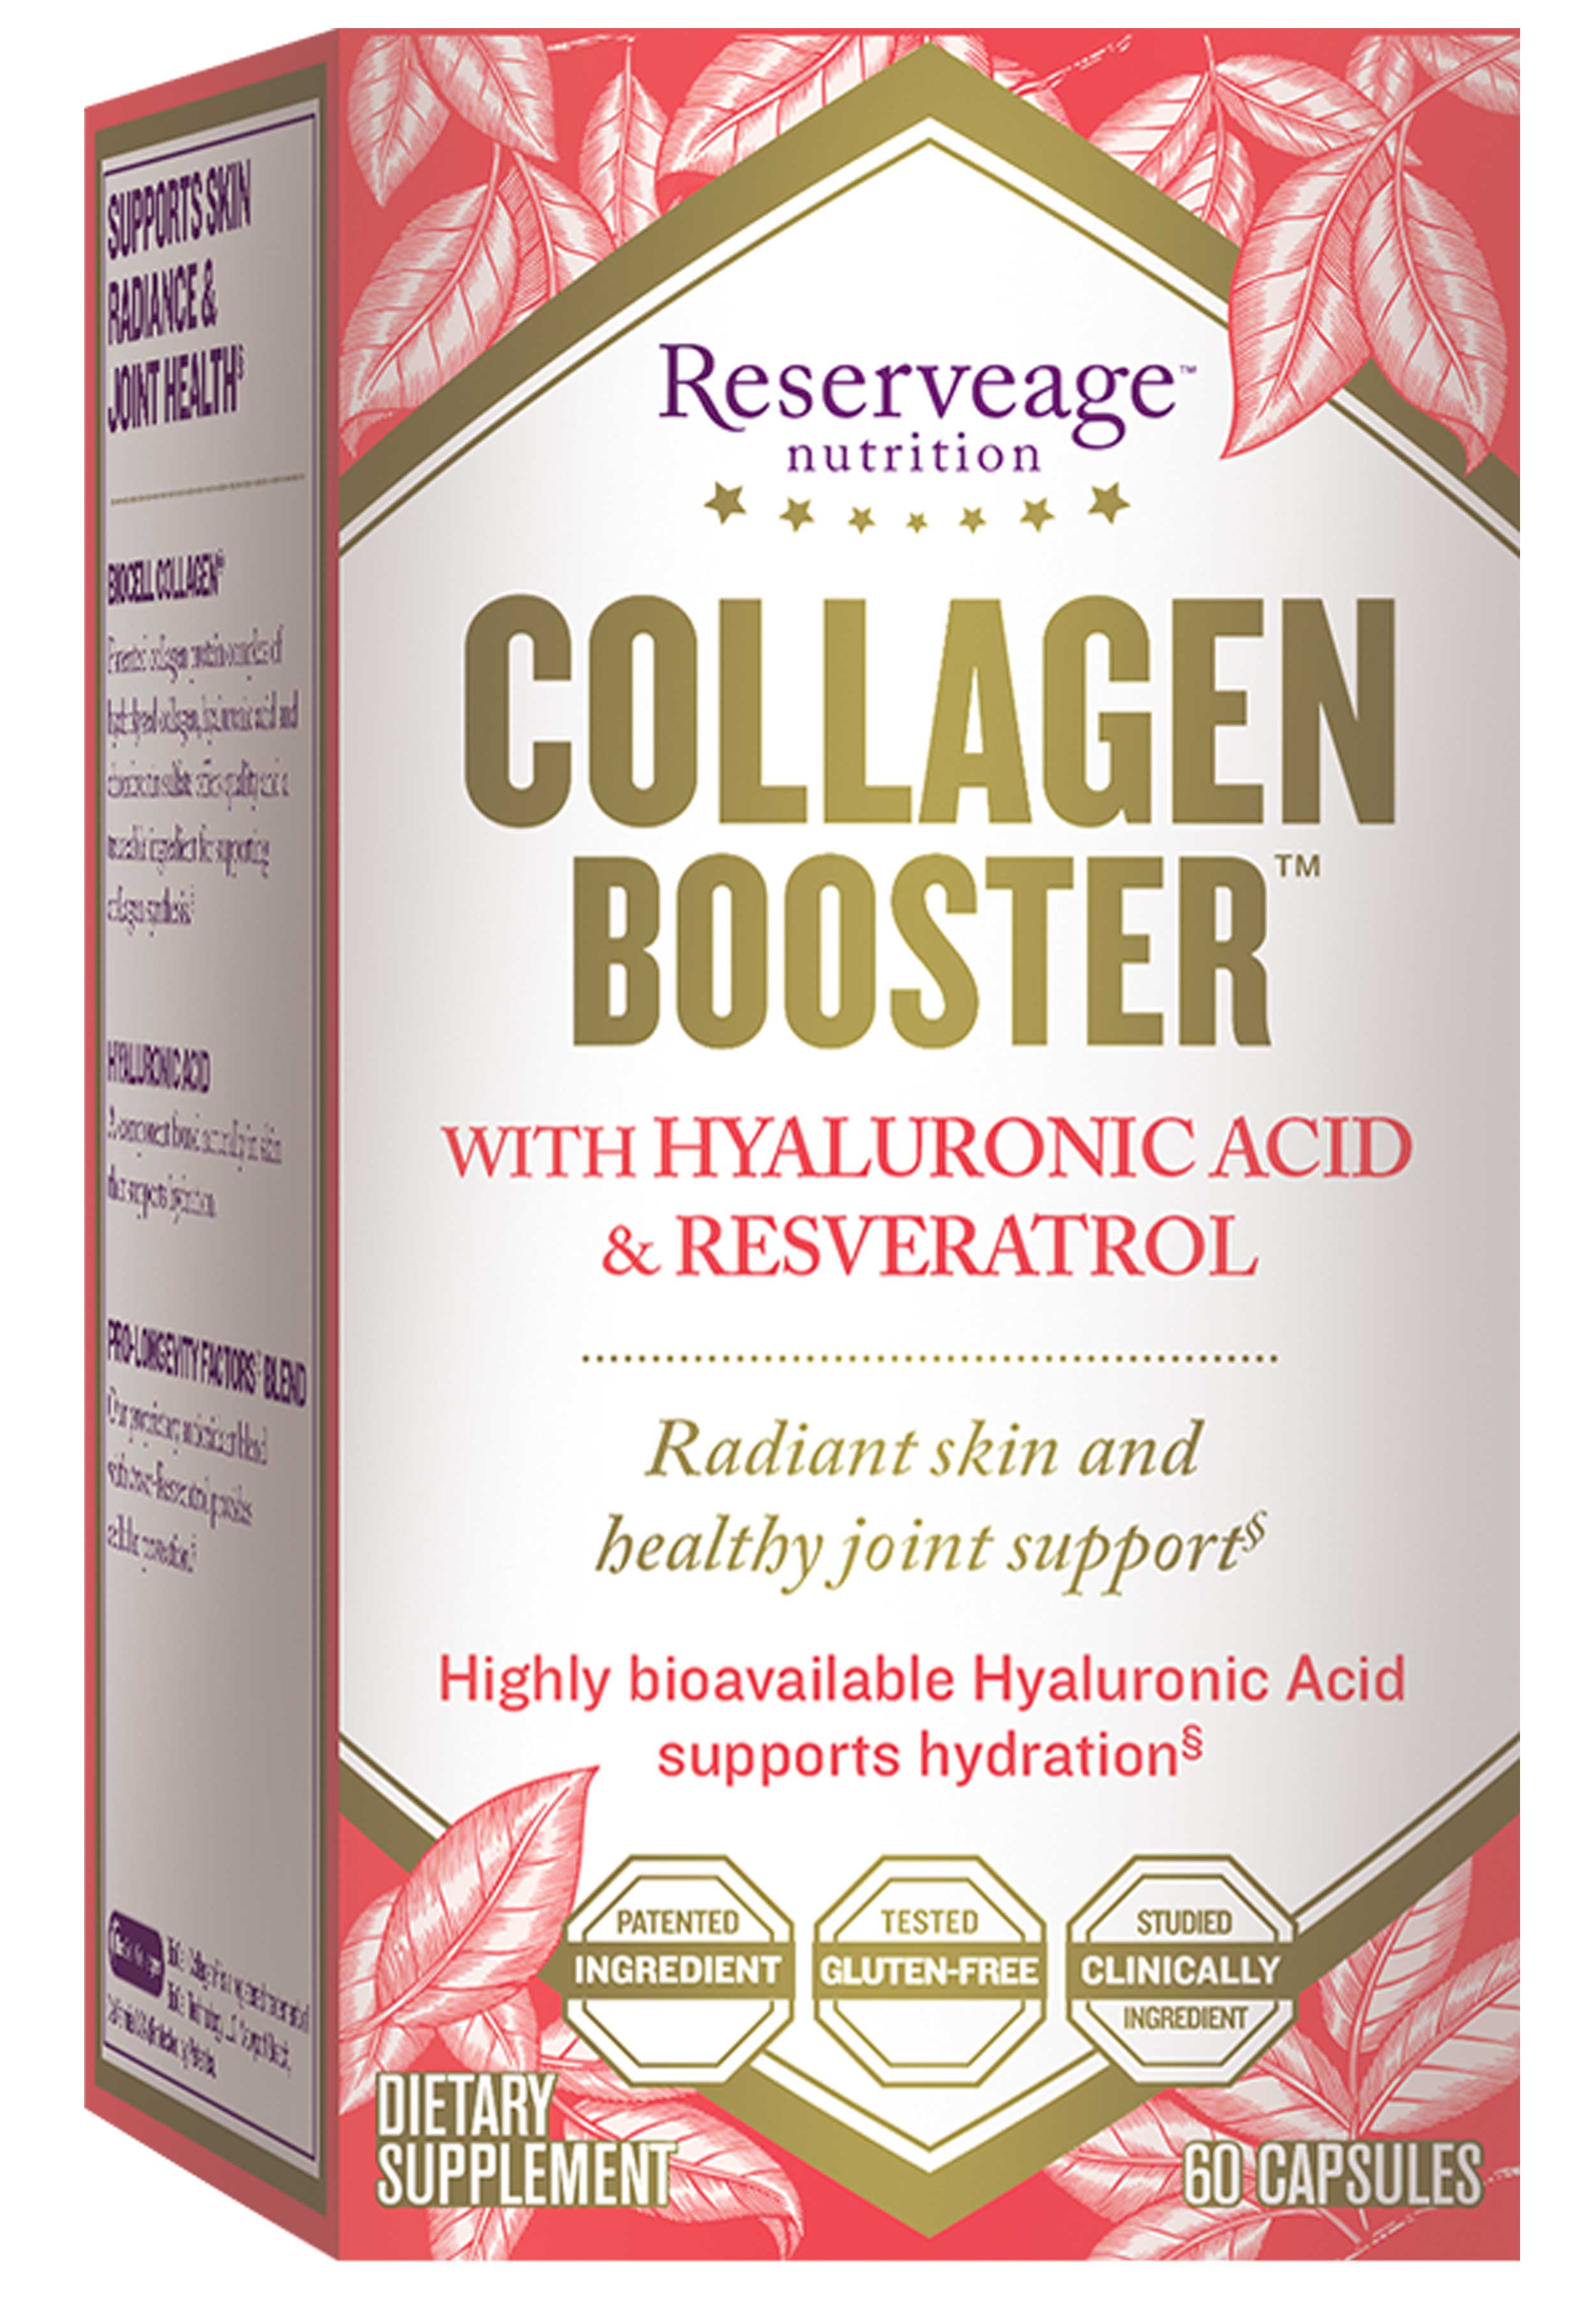 Reserveage Collagen Booster ™ For Radiant Skin And Healthy Joint Support